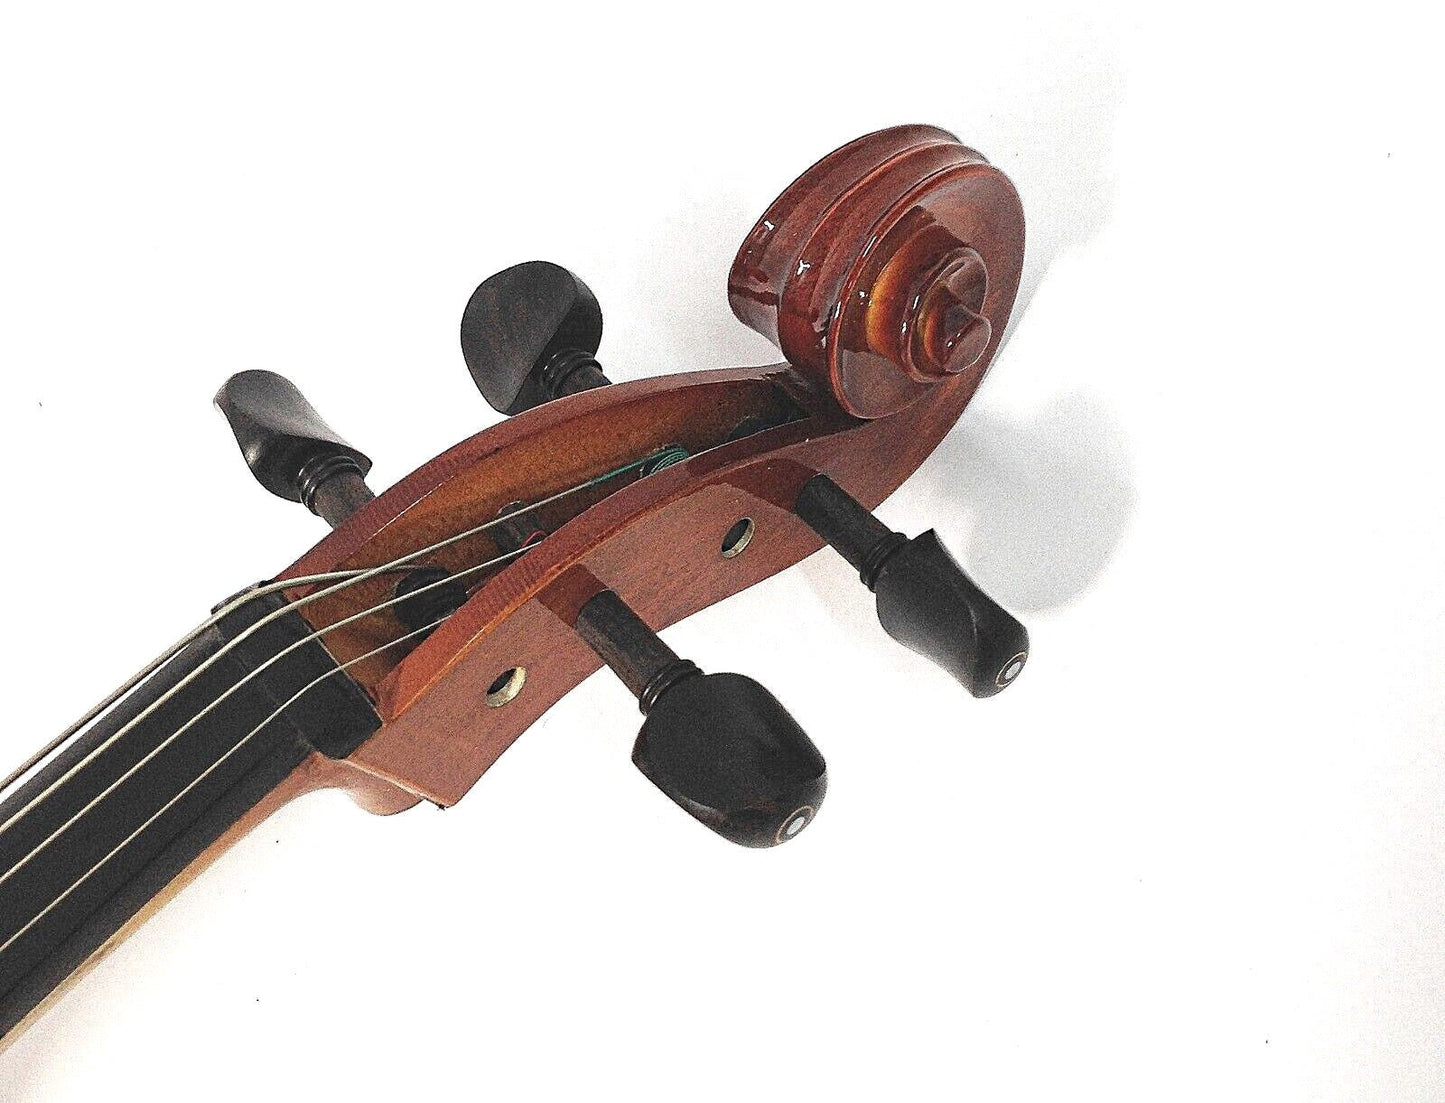 Symphony Solid wood handmade cello outfit LTC1150, 4/4 ~ 1/8 Size